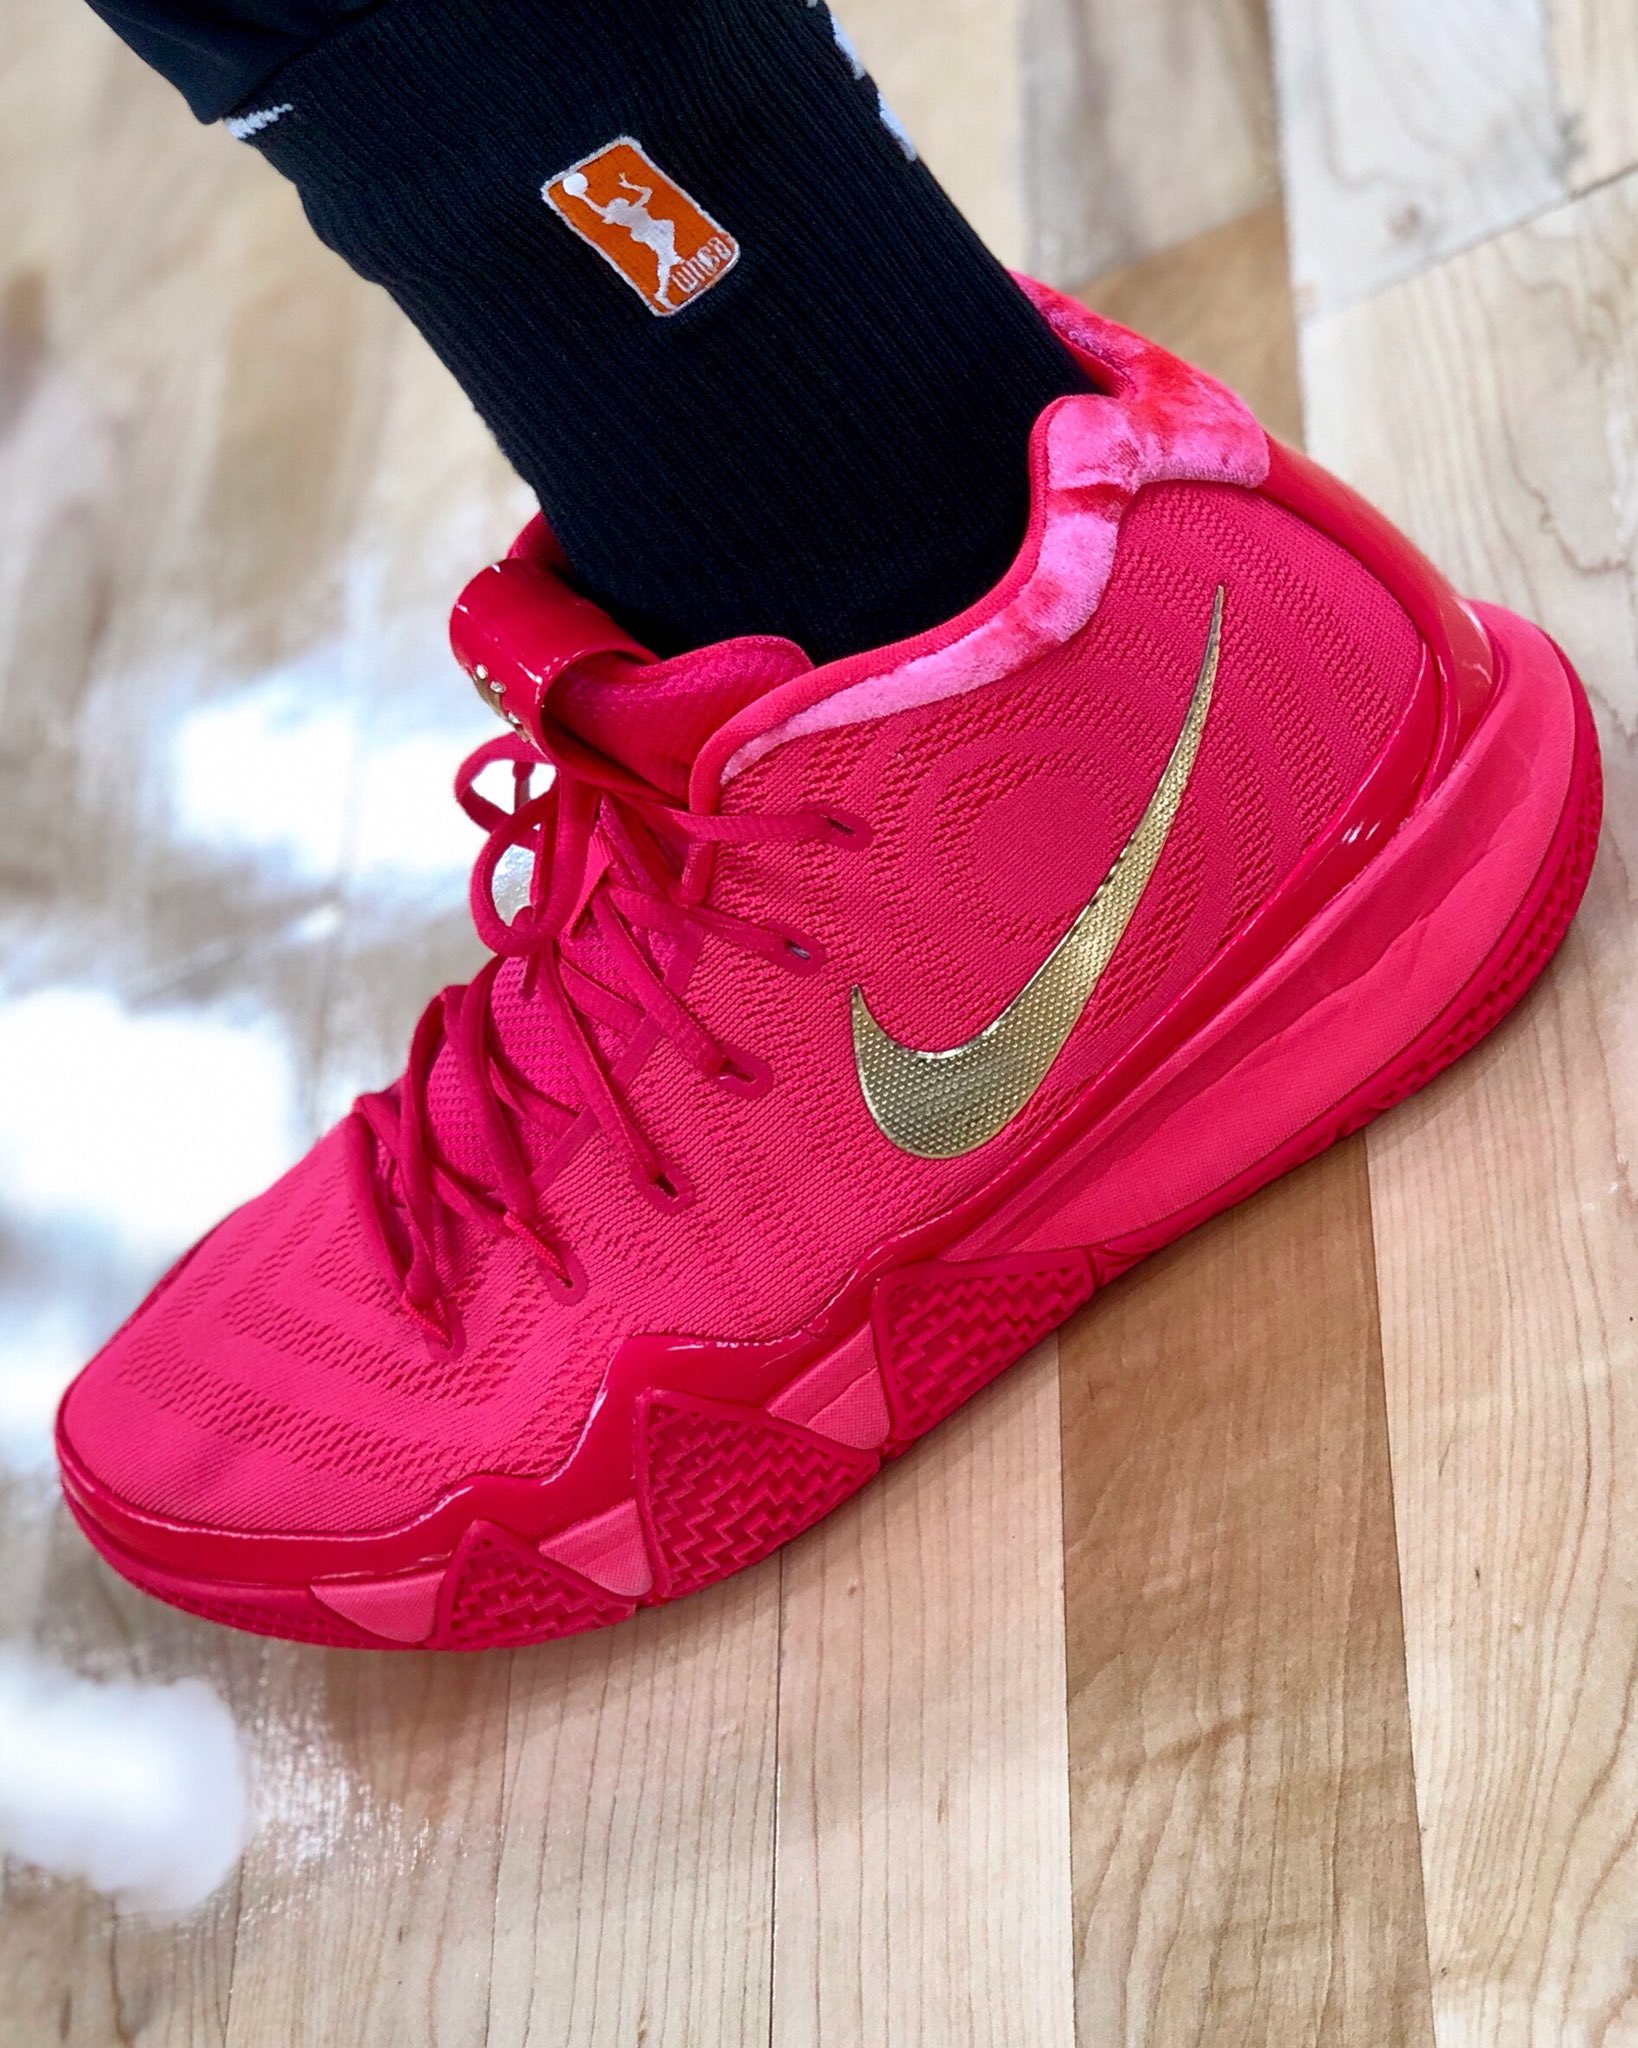 pink kyrie 4s